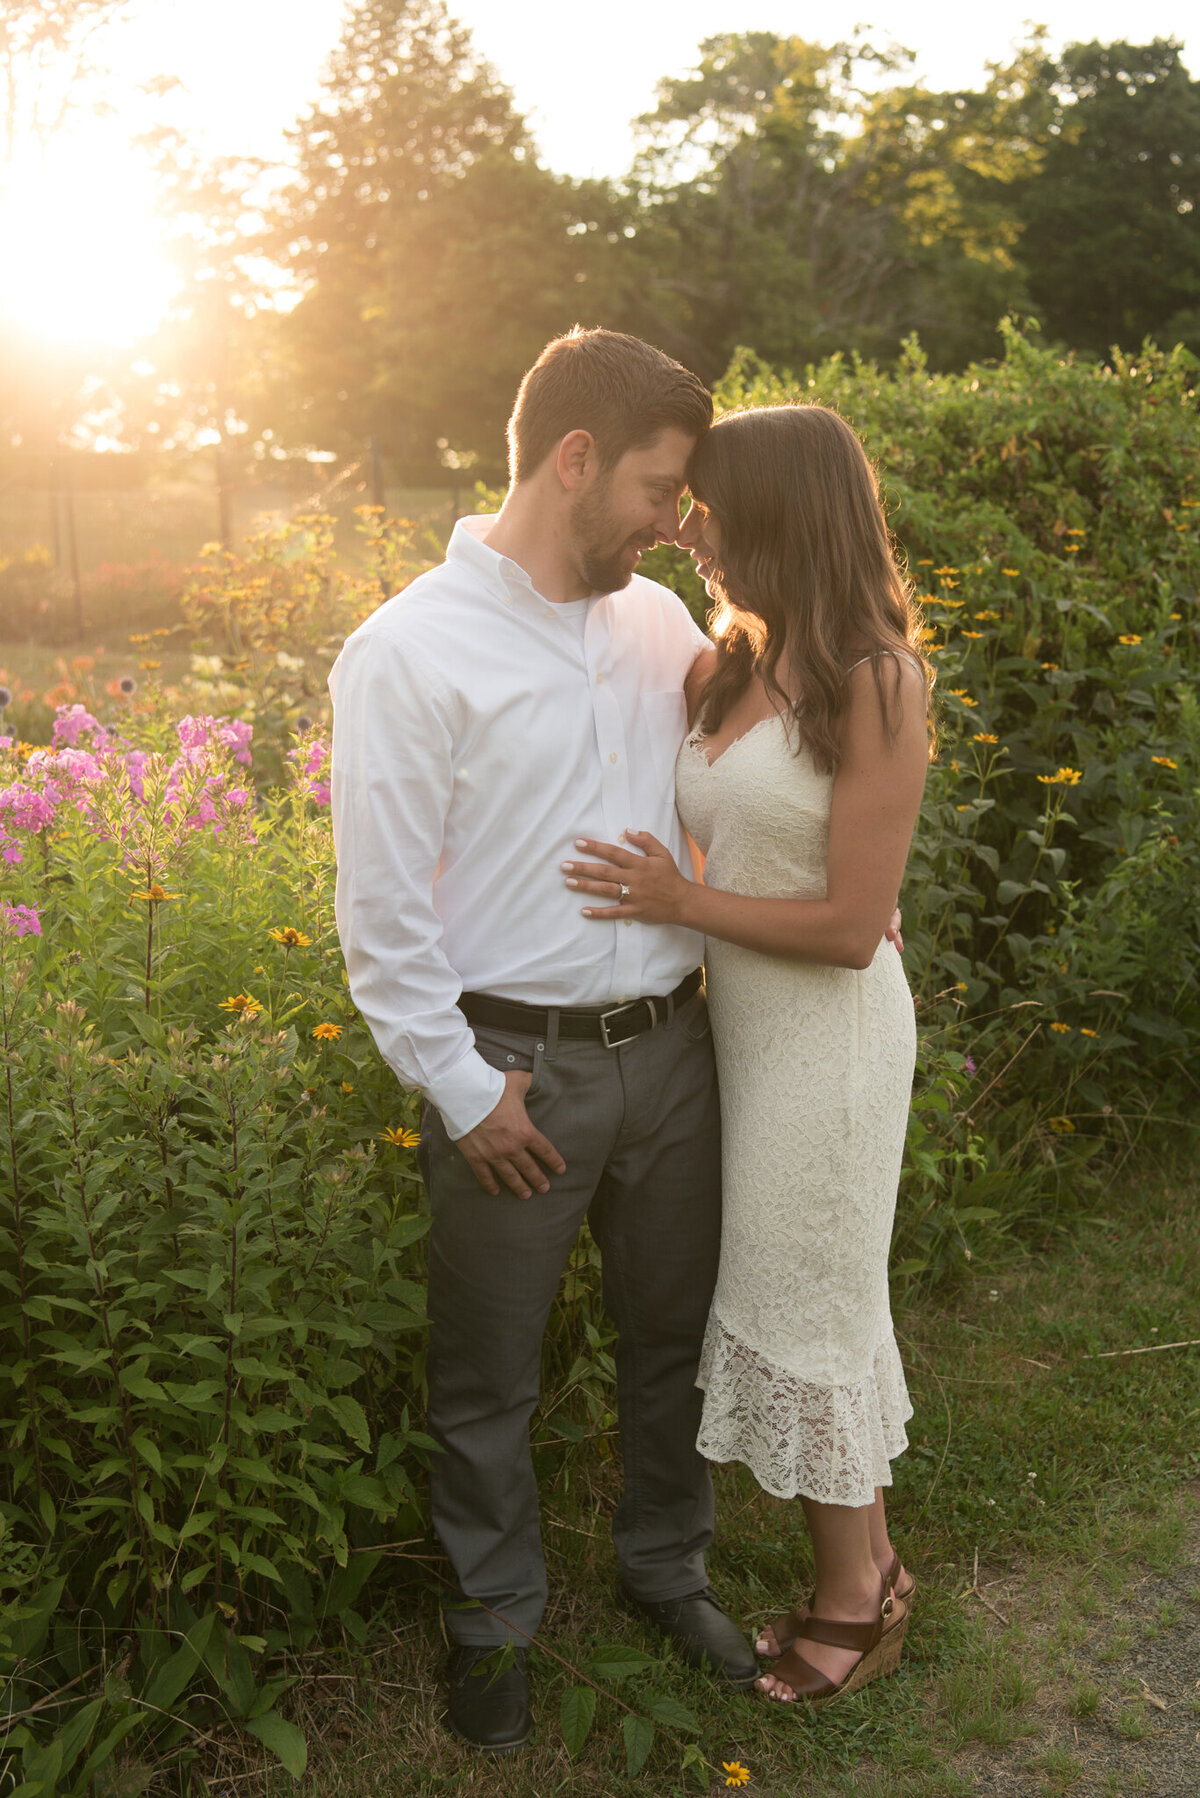 Couple kissing in garden at sunset